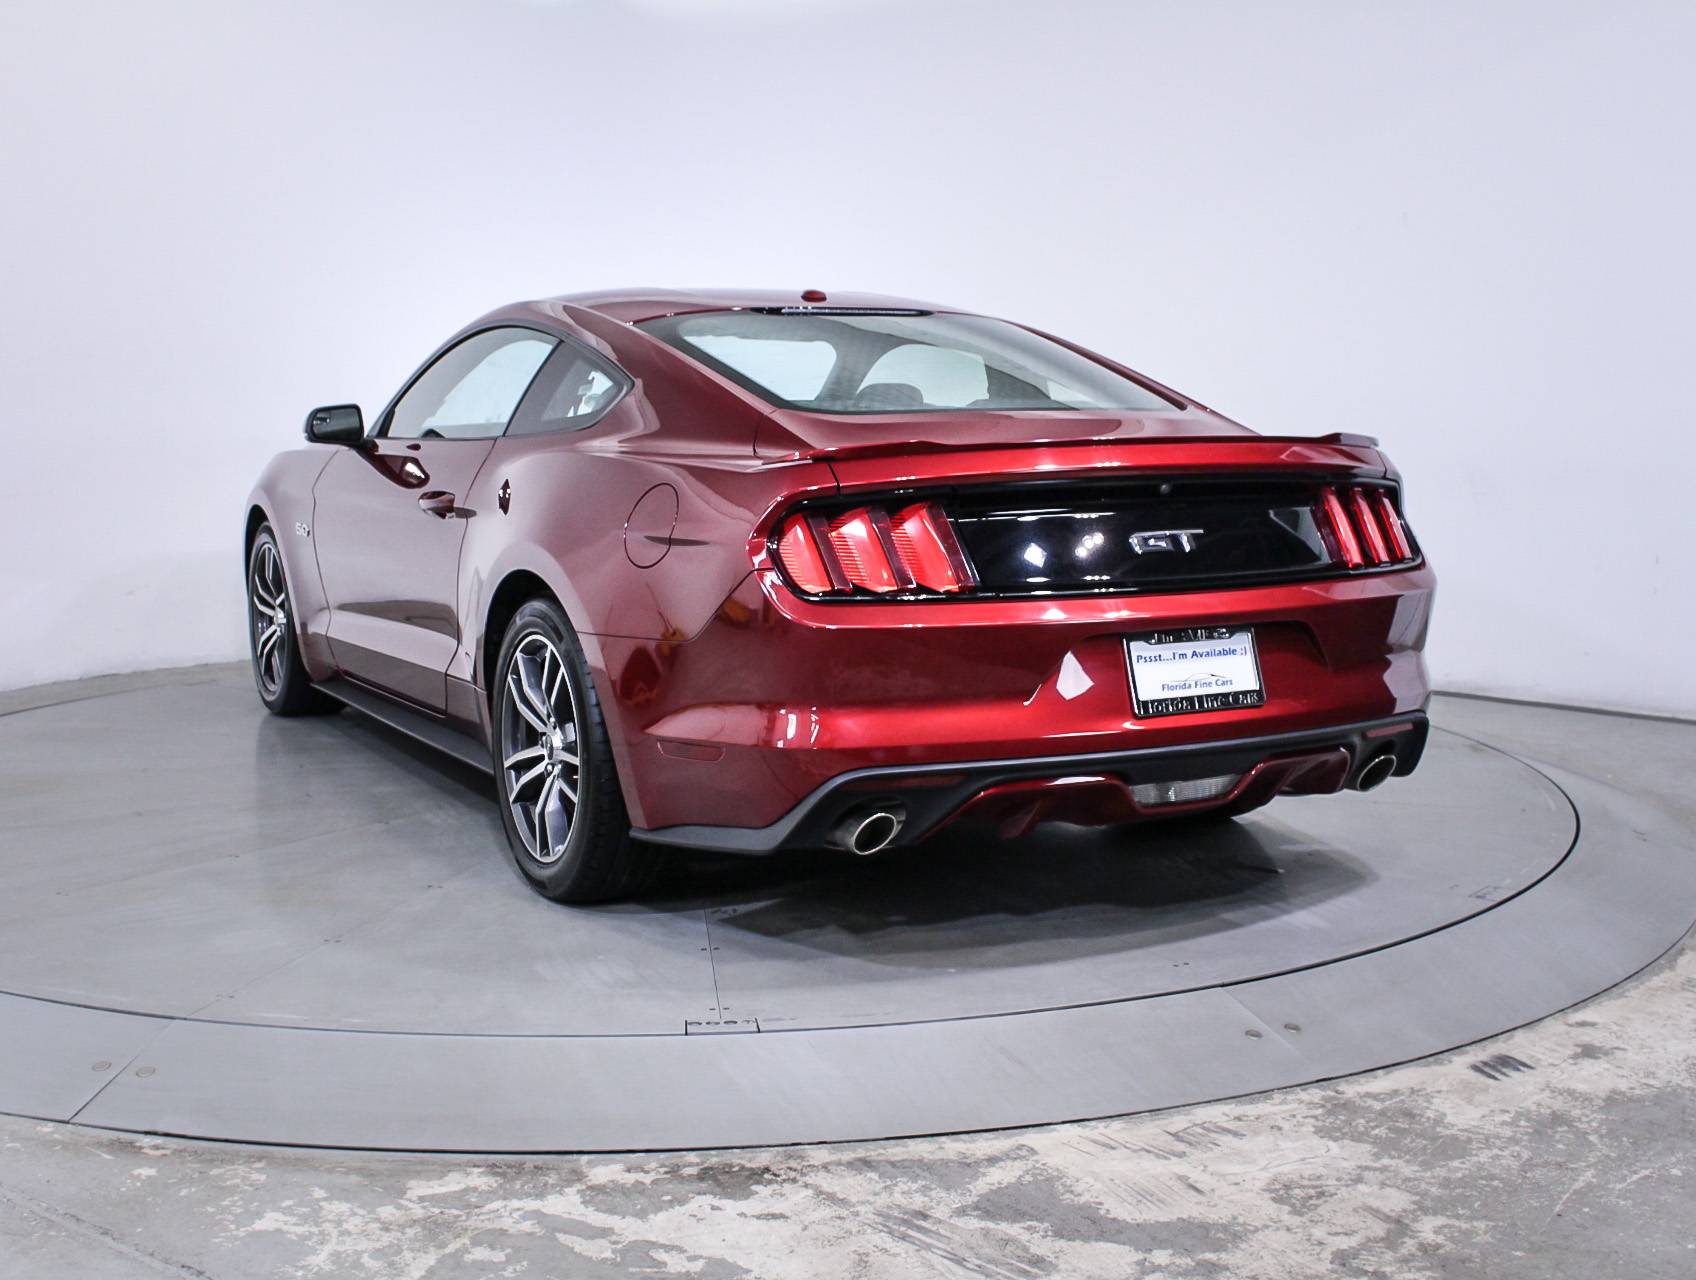 Florida Fine Cars - Used FORD MUSTANG 2016 MARGATE Gt Premium